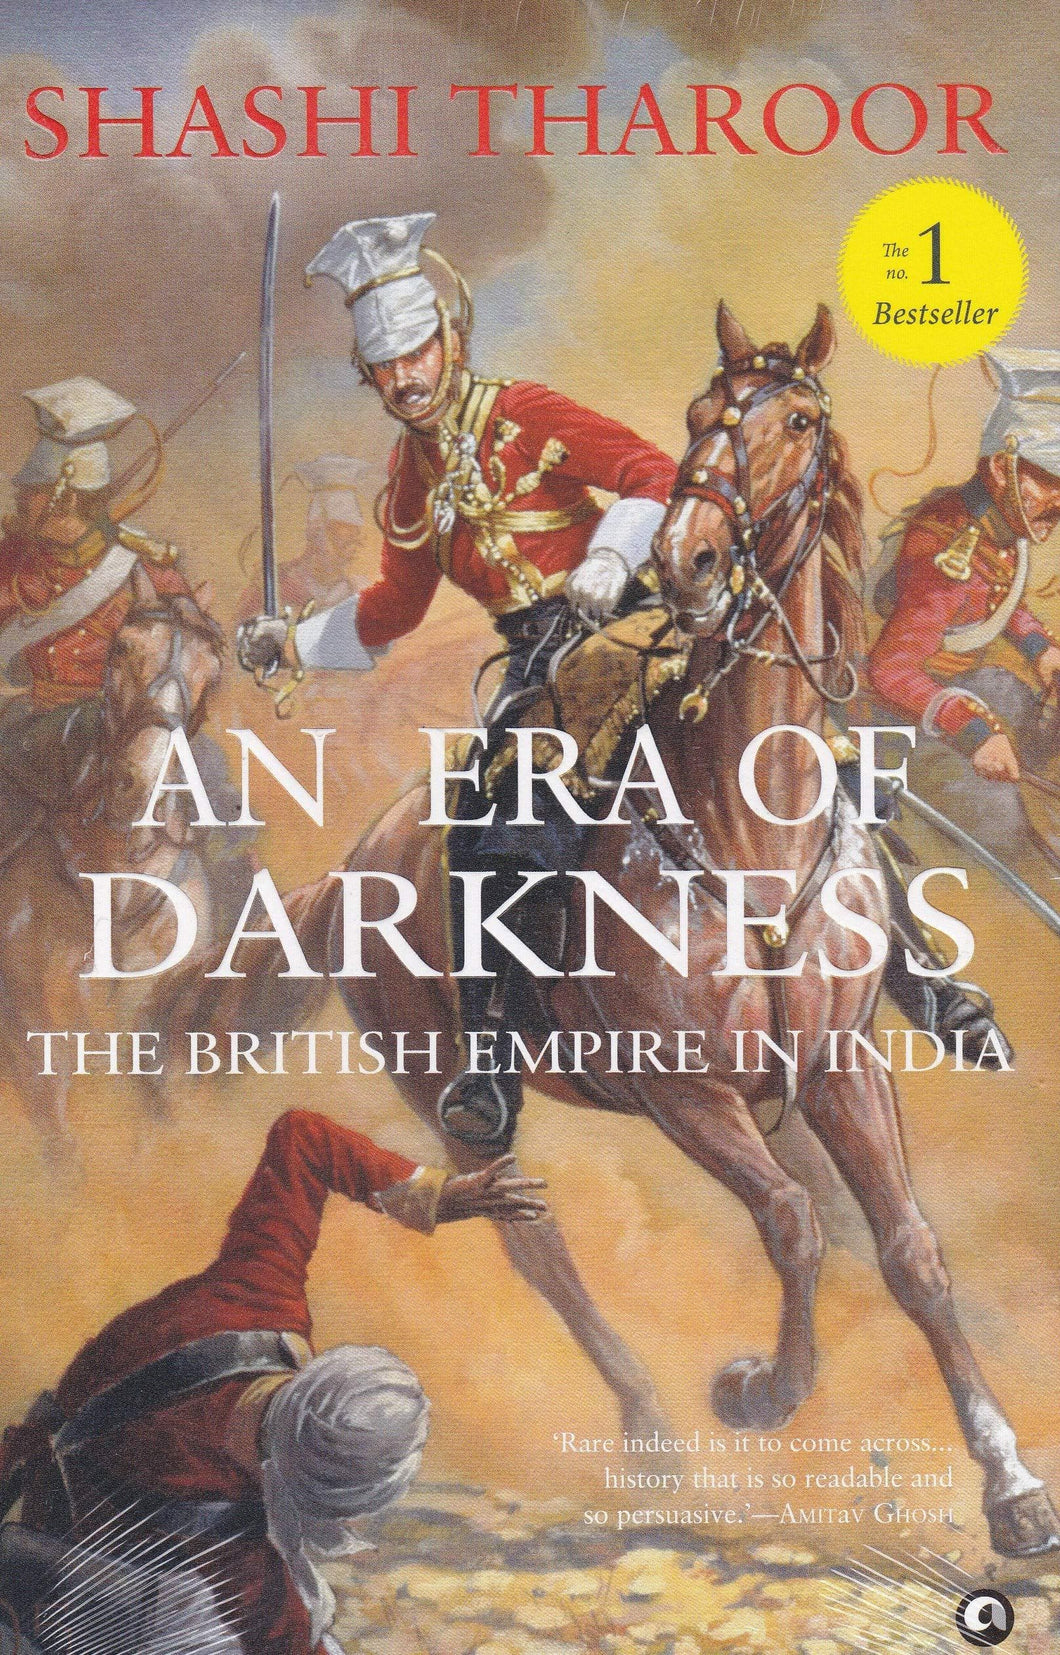 An Era of Darkness - The British Empire in India [Hardcover]